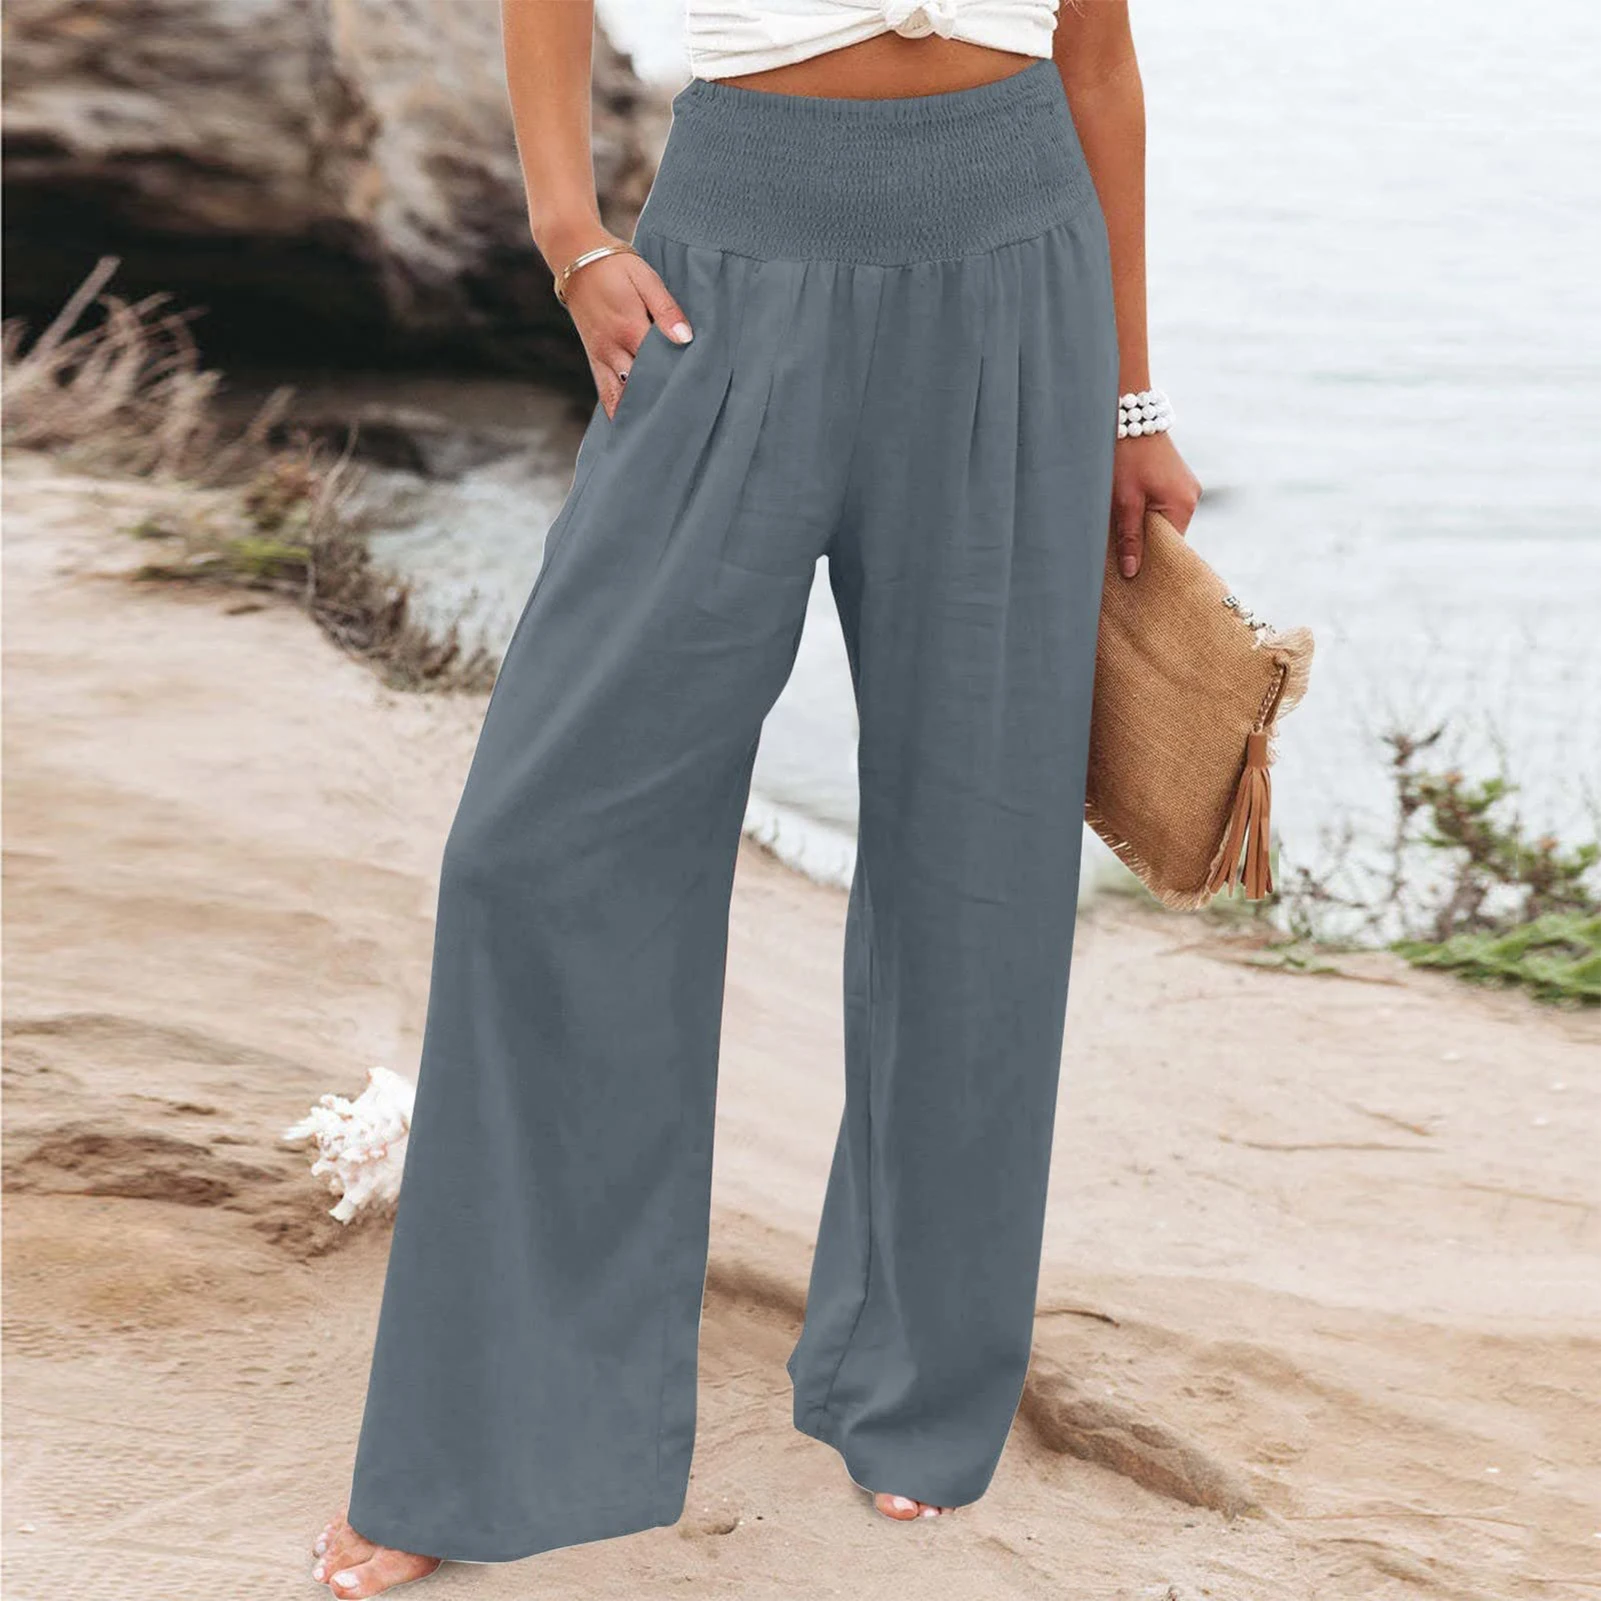 Women Loose Casual Pants High Waist Cotton Linen Straight Wide Leg Pants Solid with Pockets Fashion Summer Trousers